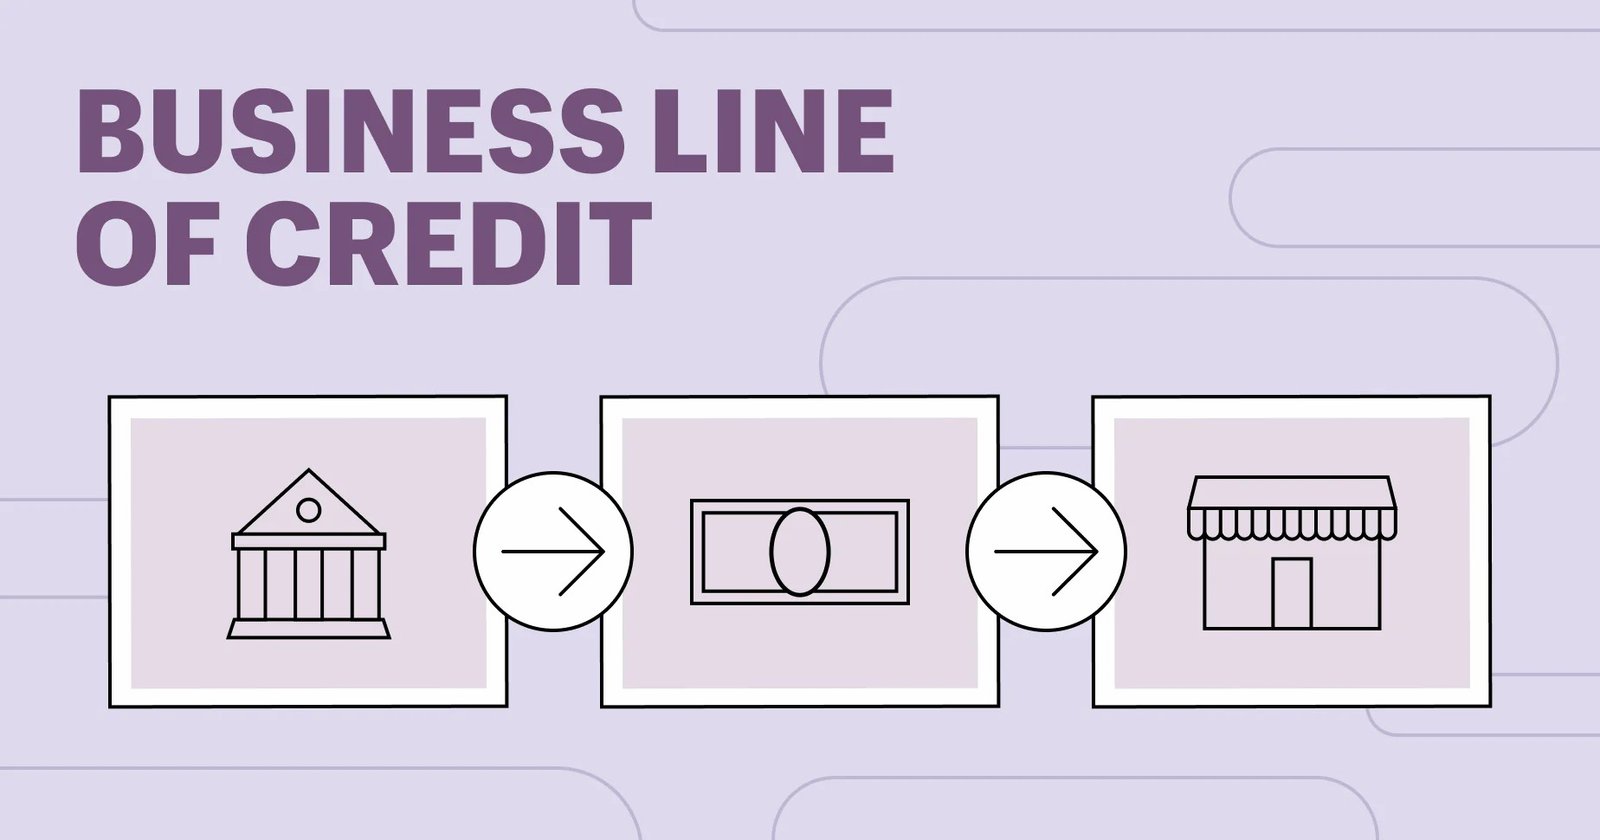 How Business Line of Credit Works